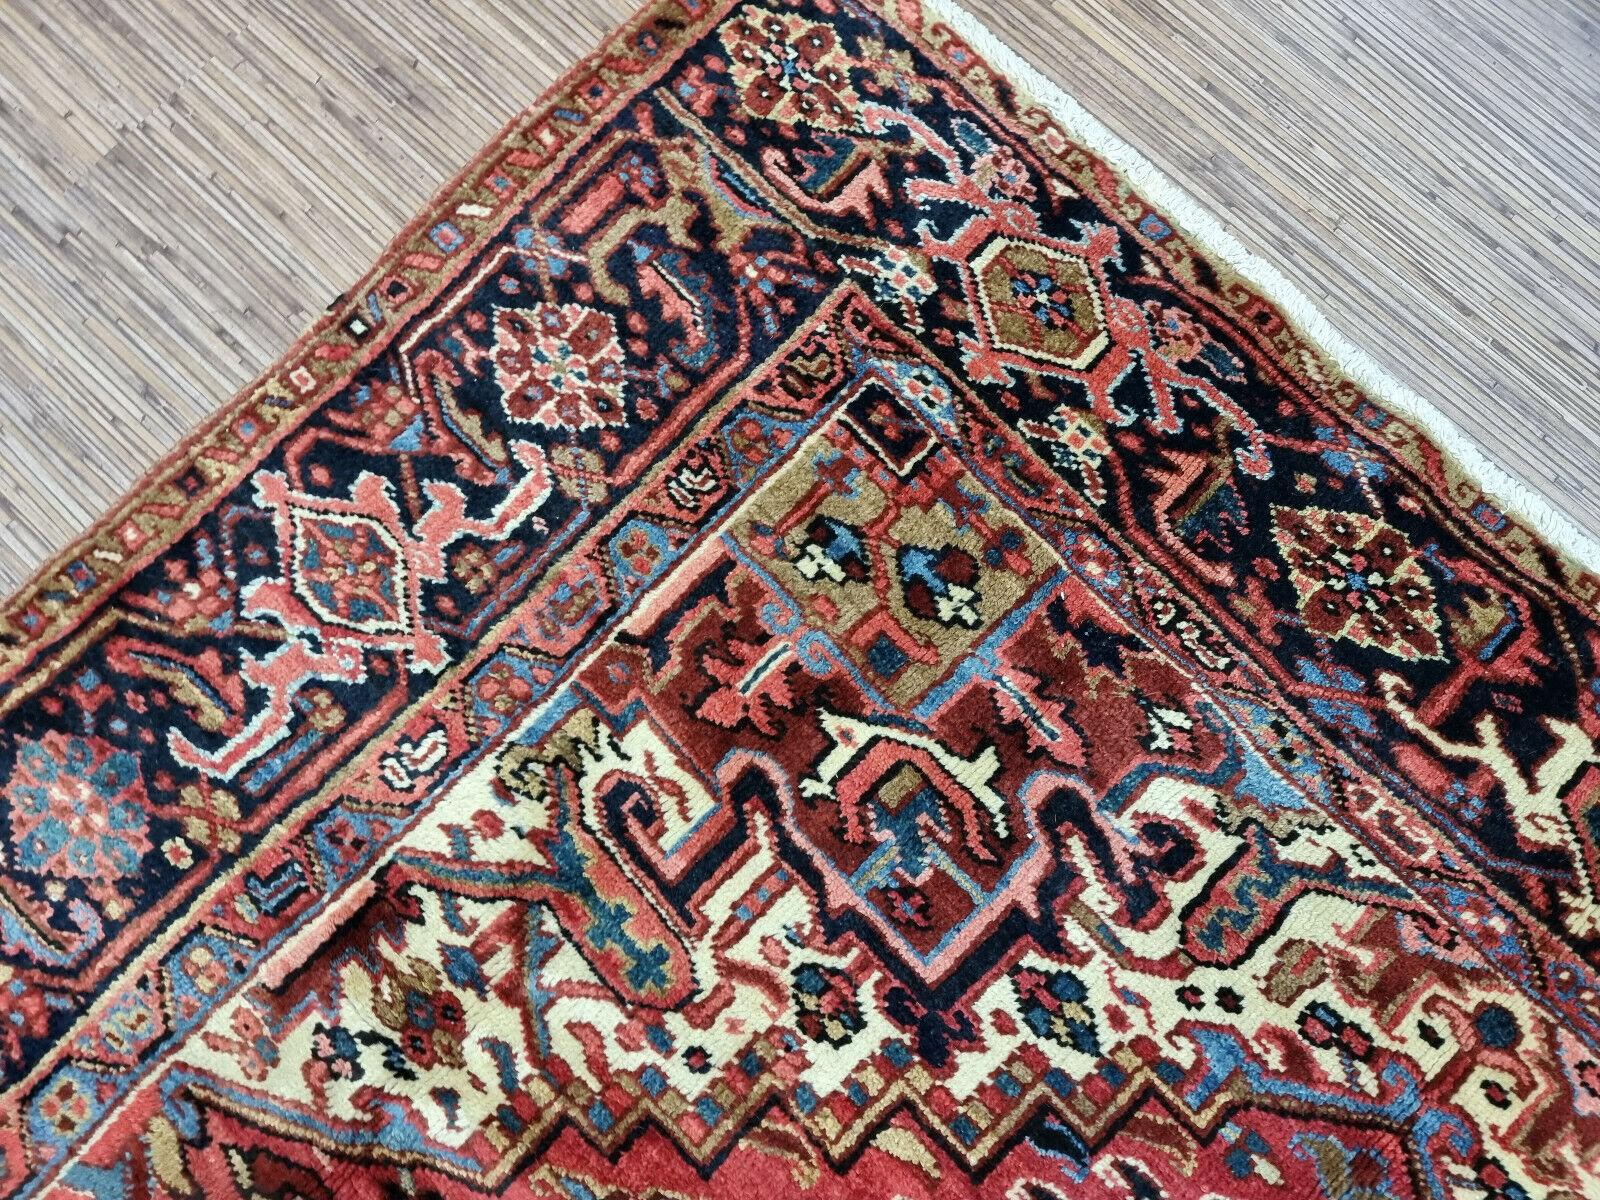 Handmade Antique Persian Style Heriz Rug 5.5' x 8.8', 1920s - 1D123 In Good Condition For Sale In Bordeaux, FR